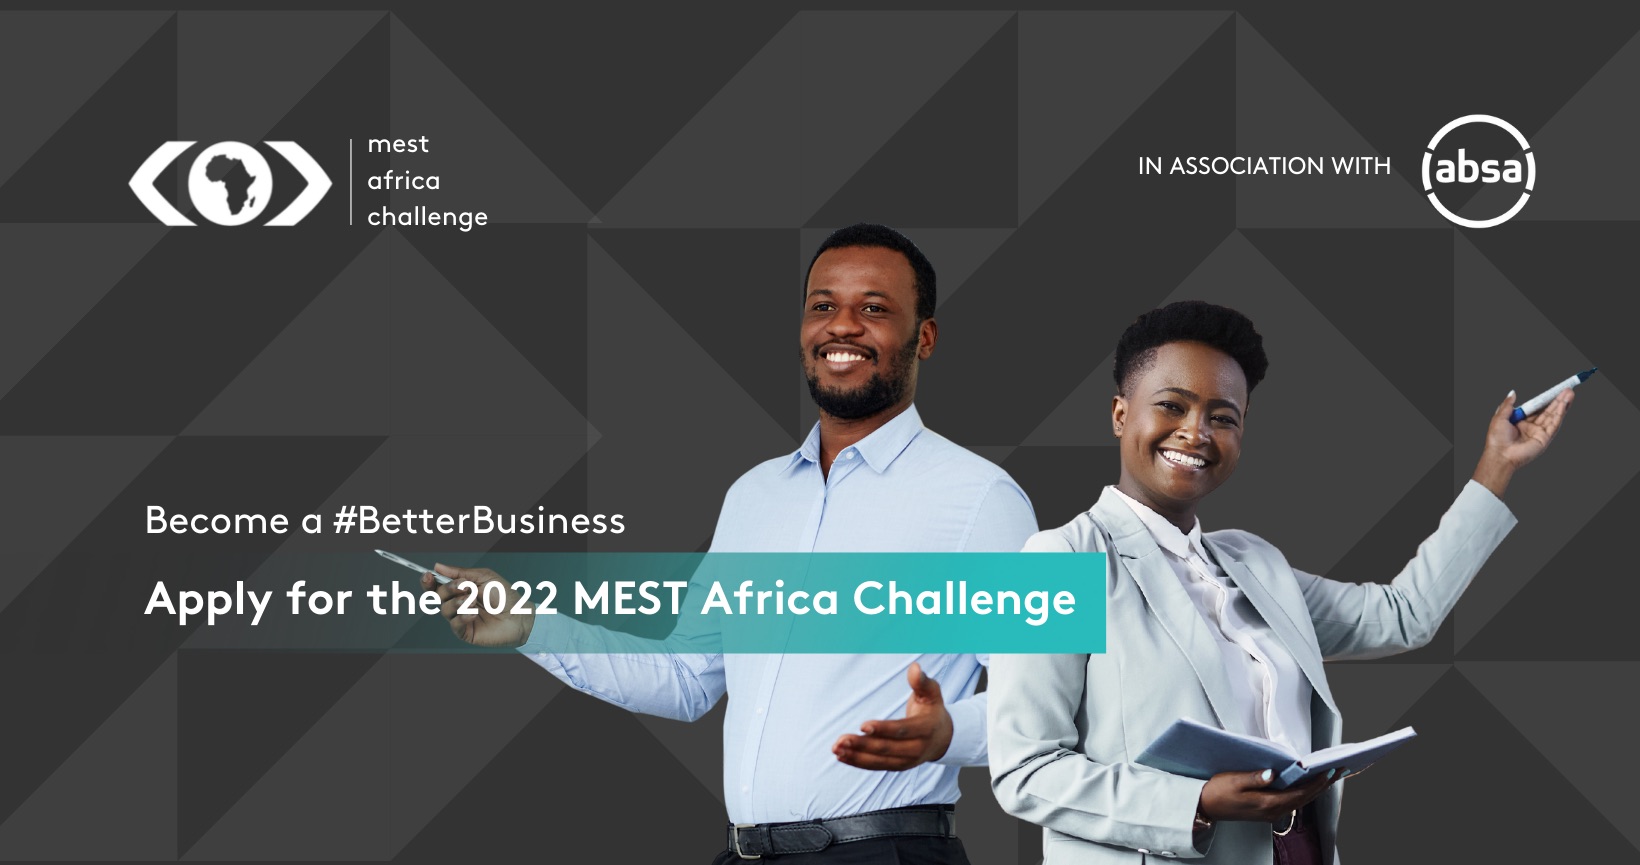 Get up to $50,000 in Equity with 2022 MEST Africa Challenge